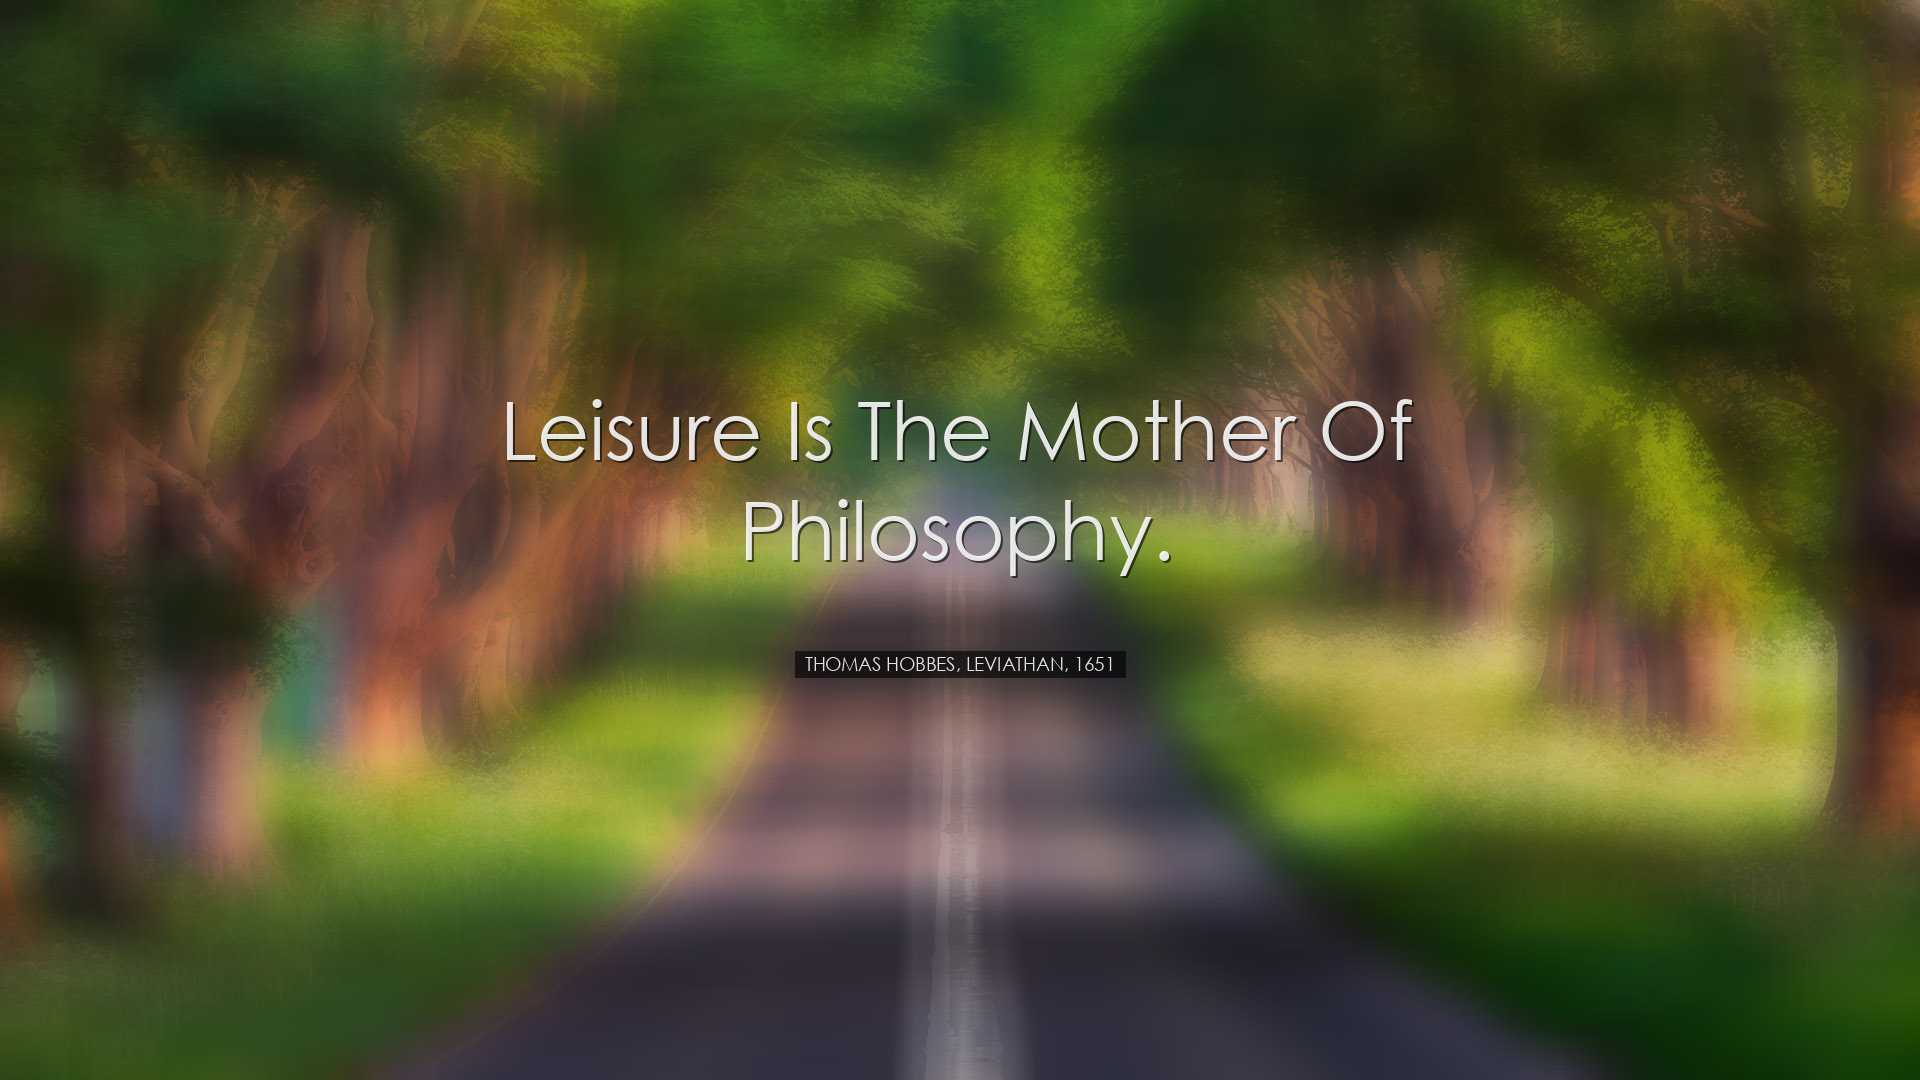 Leisure is the mother of Philosophy. - Thomas Hobbes, Leviathan, 1